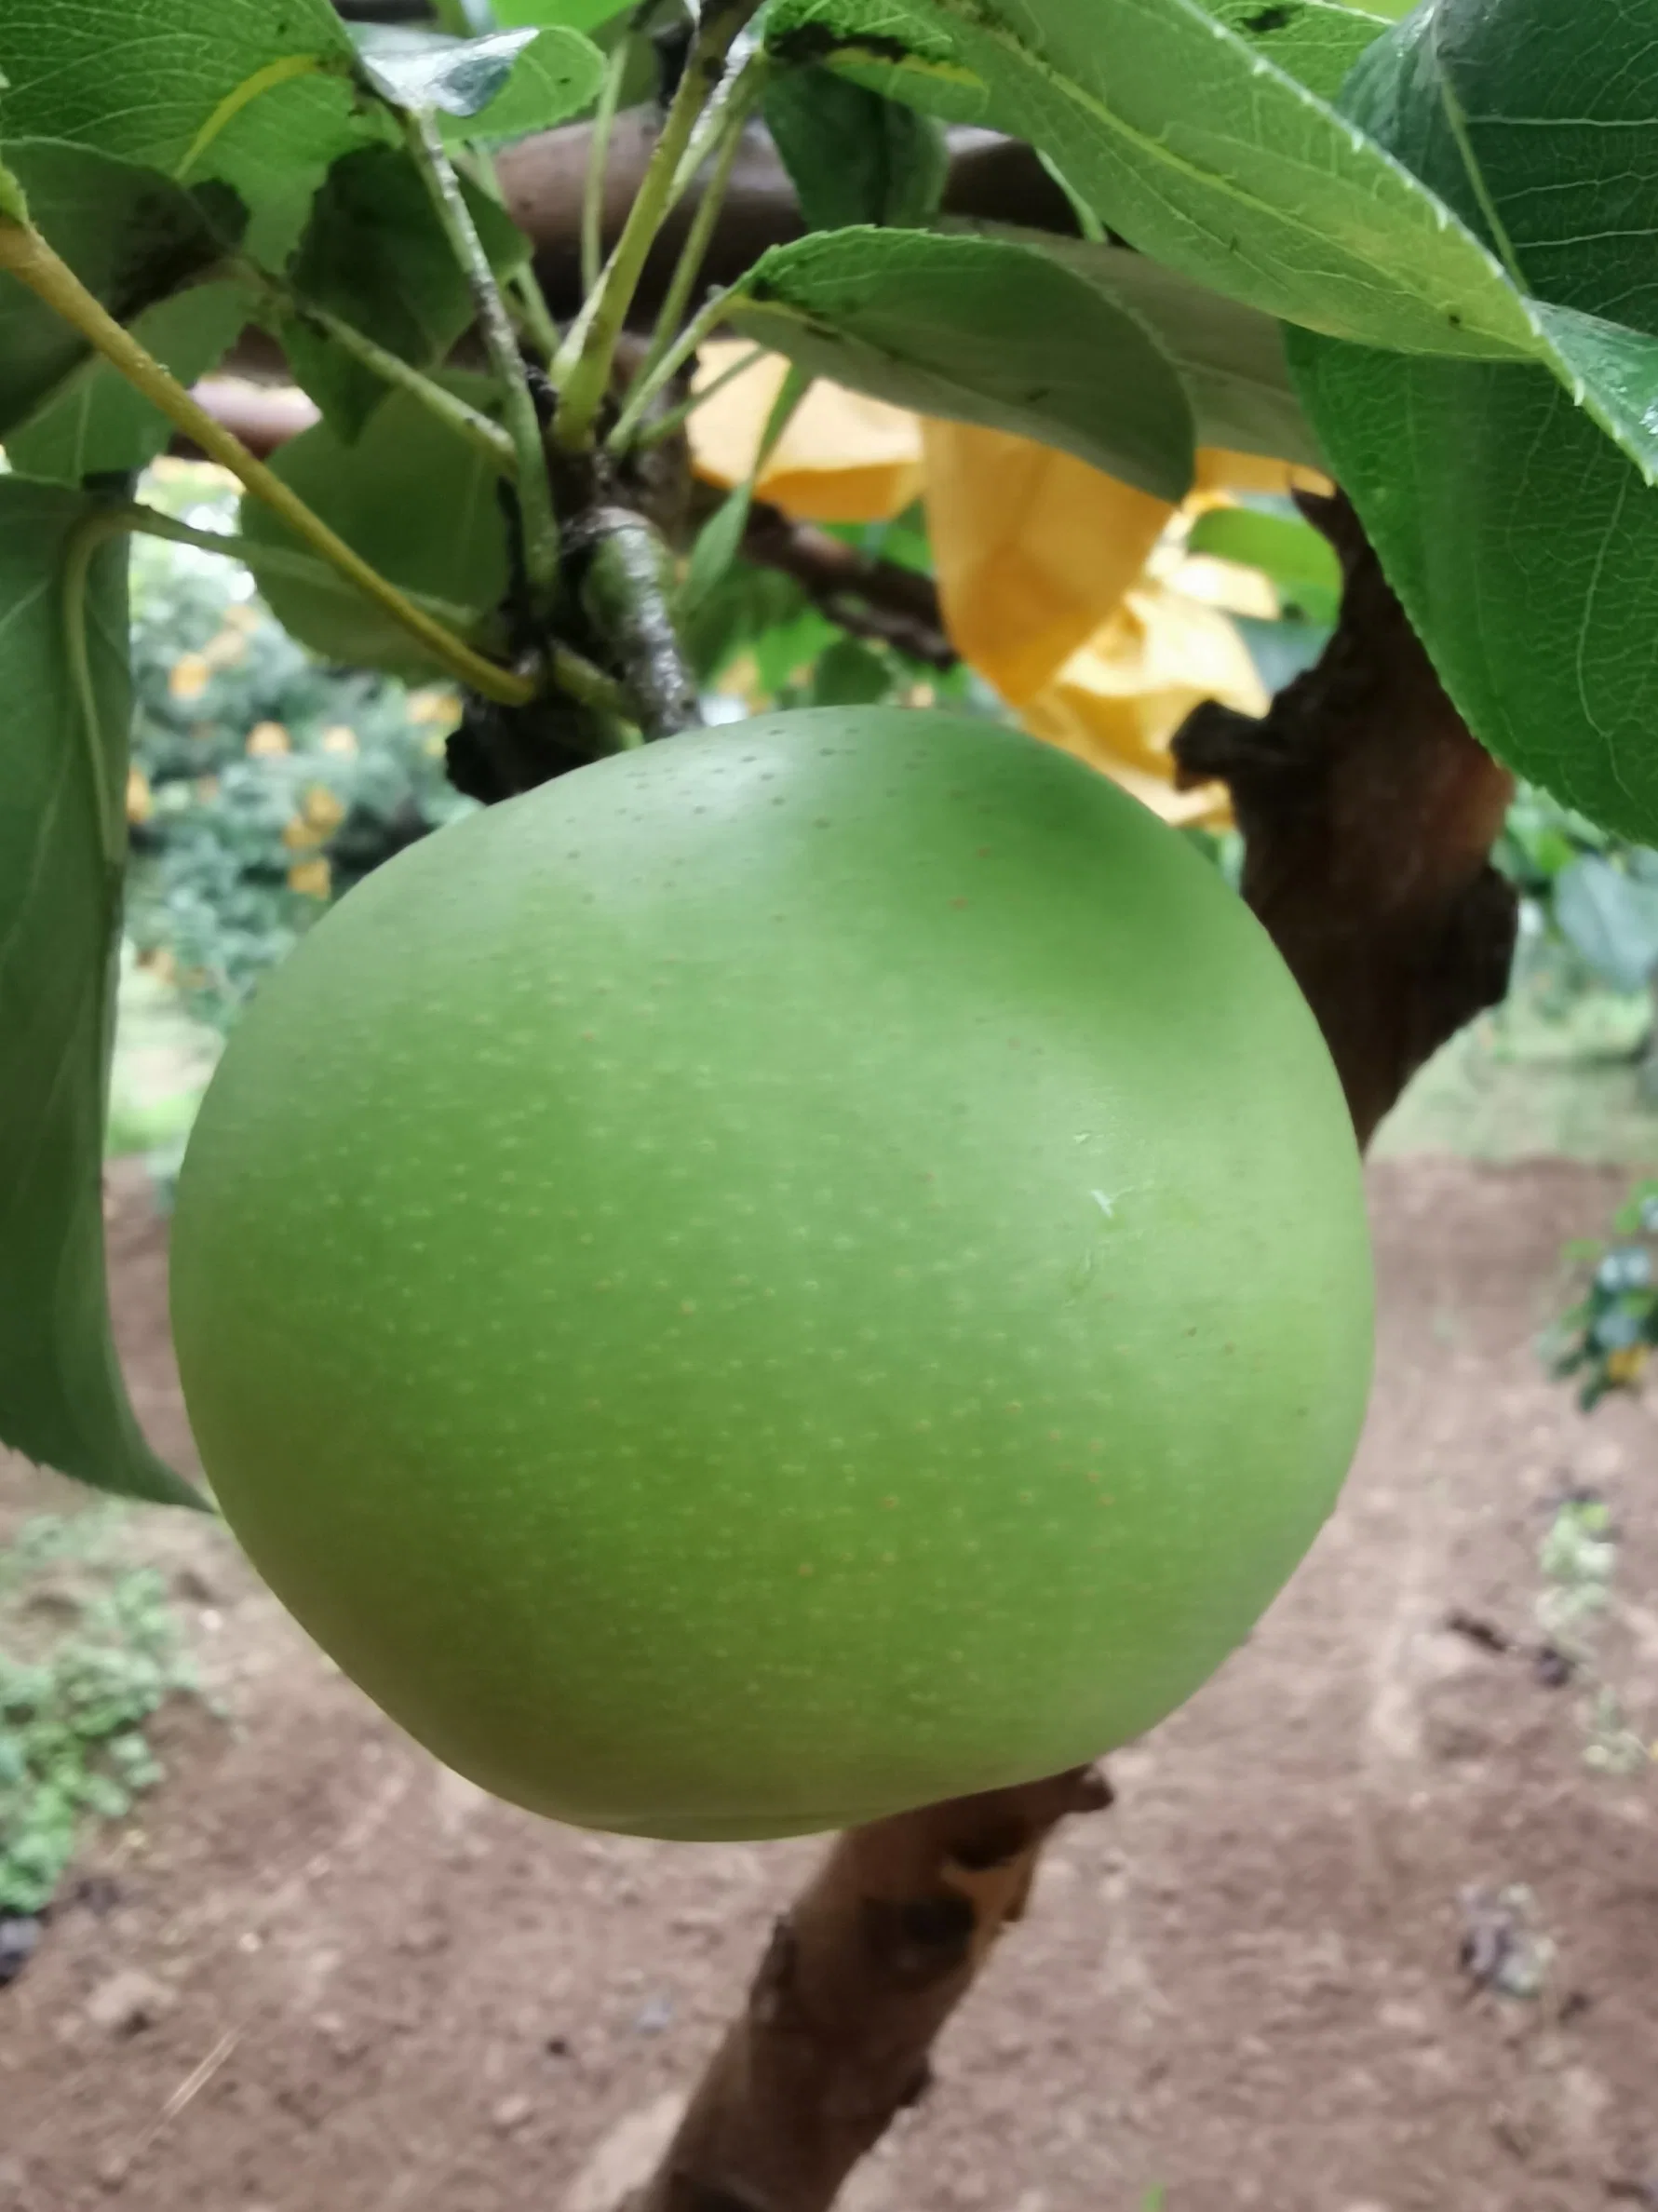 New Season Green Emerald Pear for Exporting